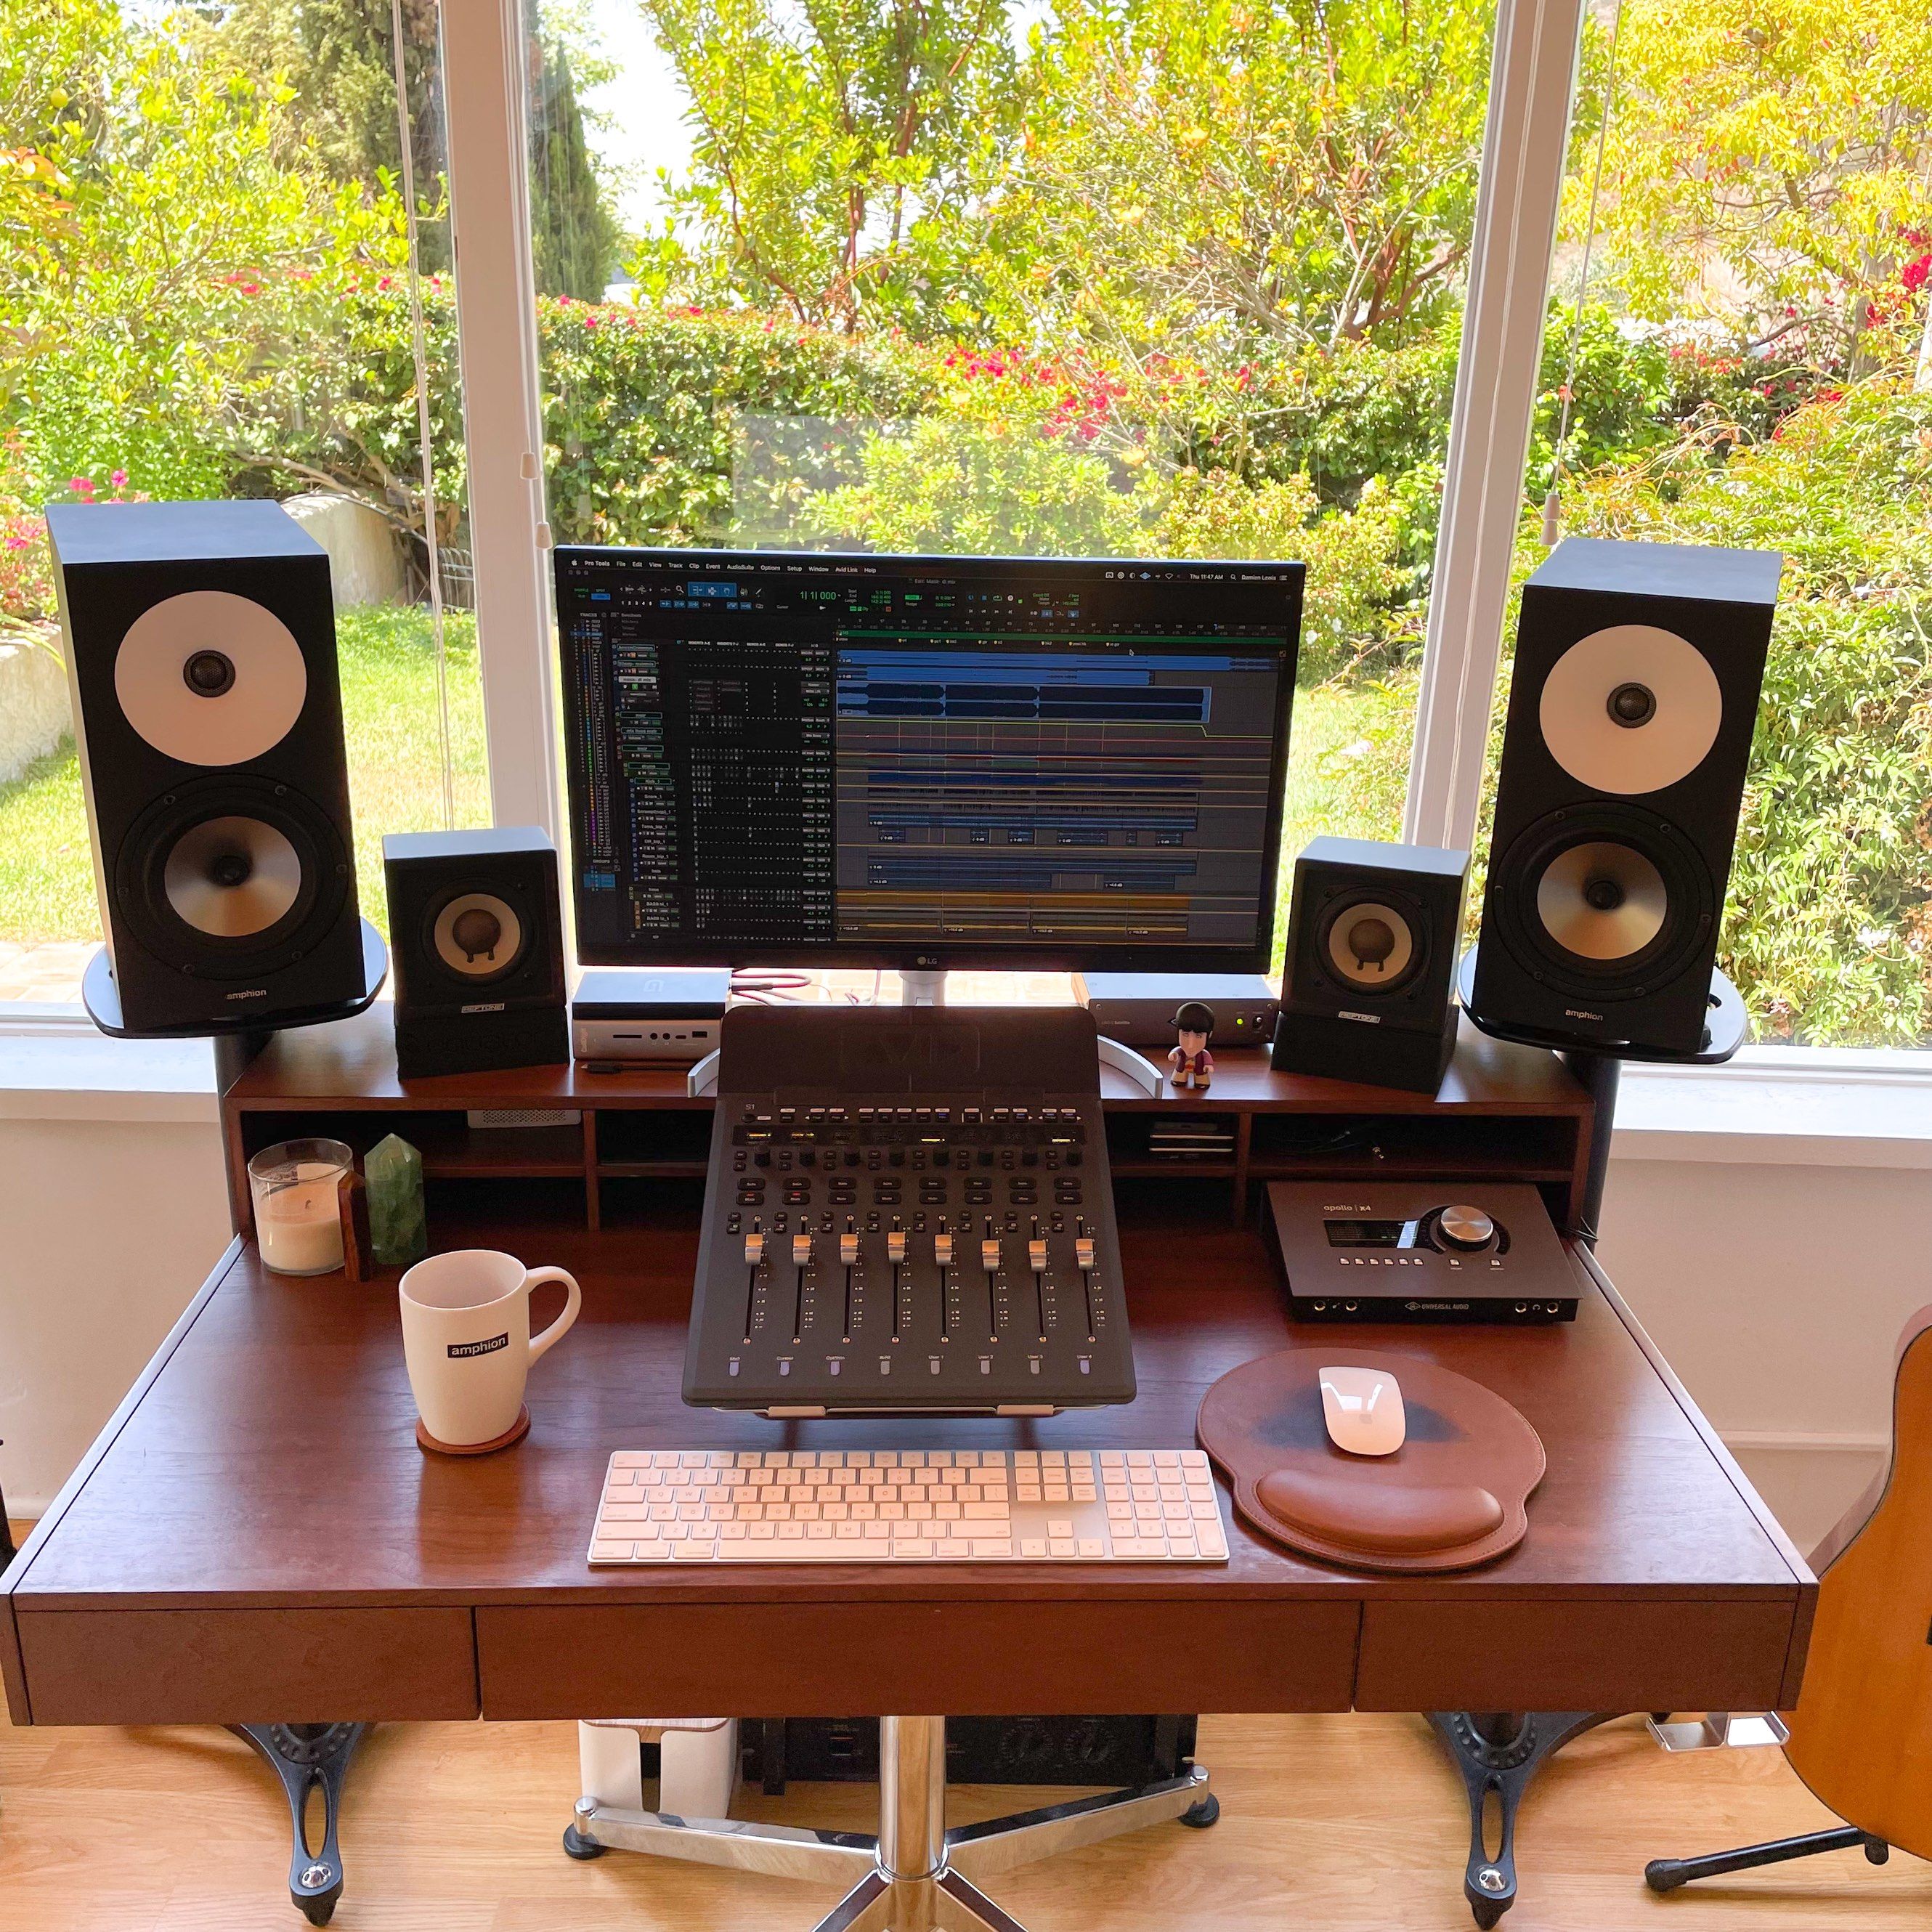 Lewis’s home setup consists of a MacMini with an Avid S1 Control Surface, Apollo interfaces, and a variety of favored plugins in addition to his Amphion One18s and Amp700.